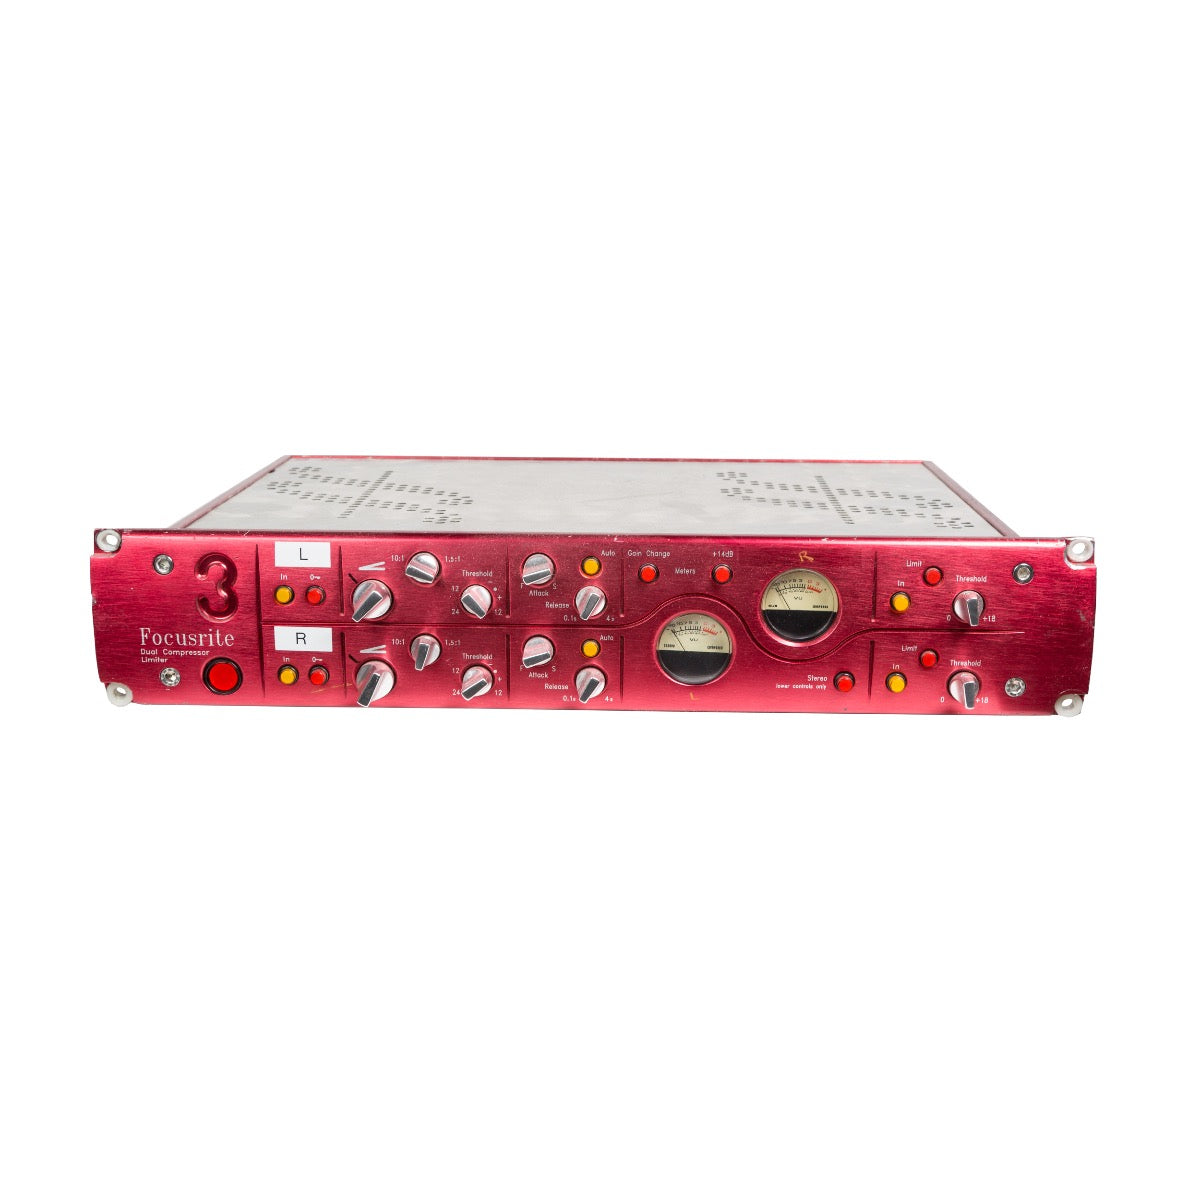 Michael Brauer Collection Focusrite Red 3 Serial Number F06567T From Rack 1